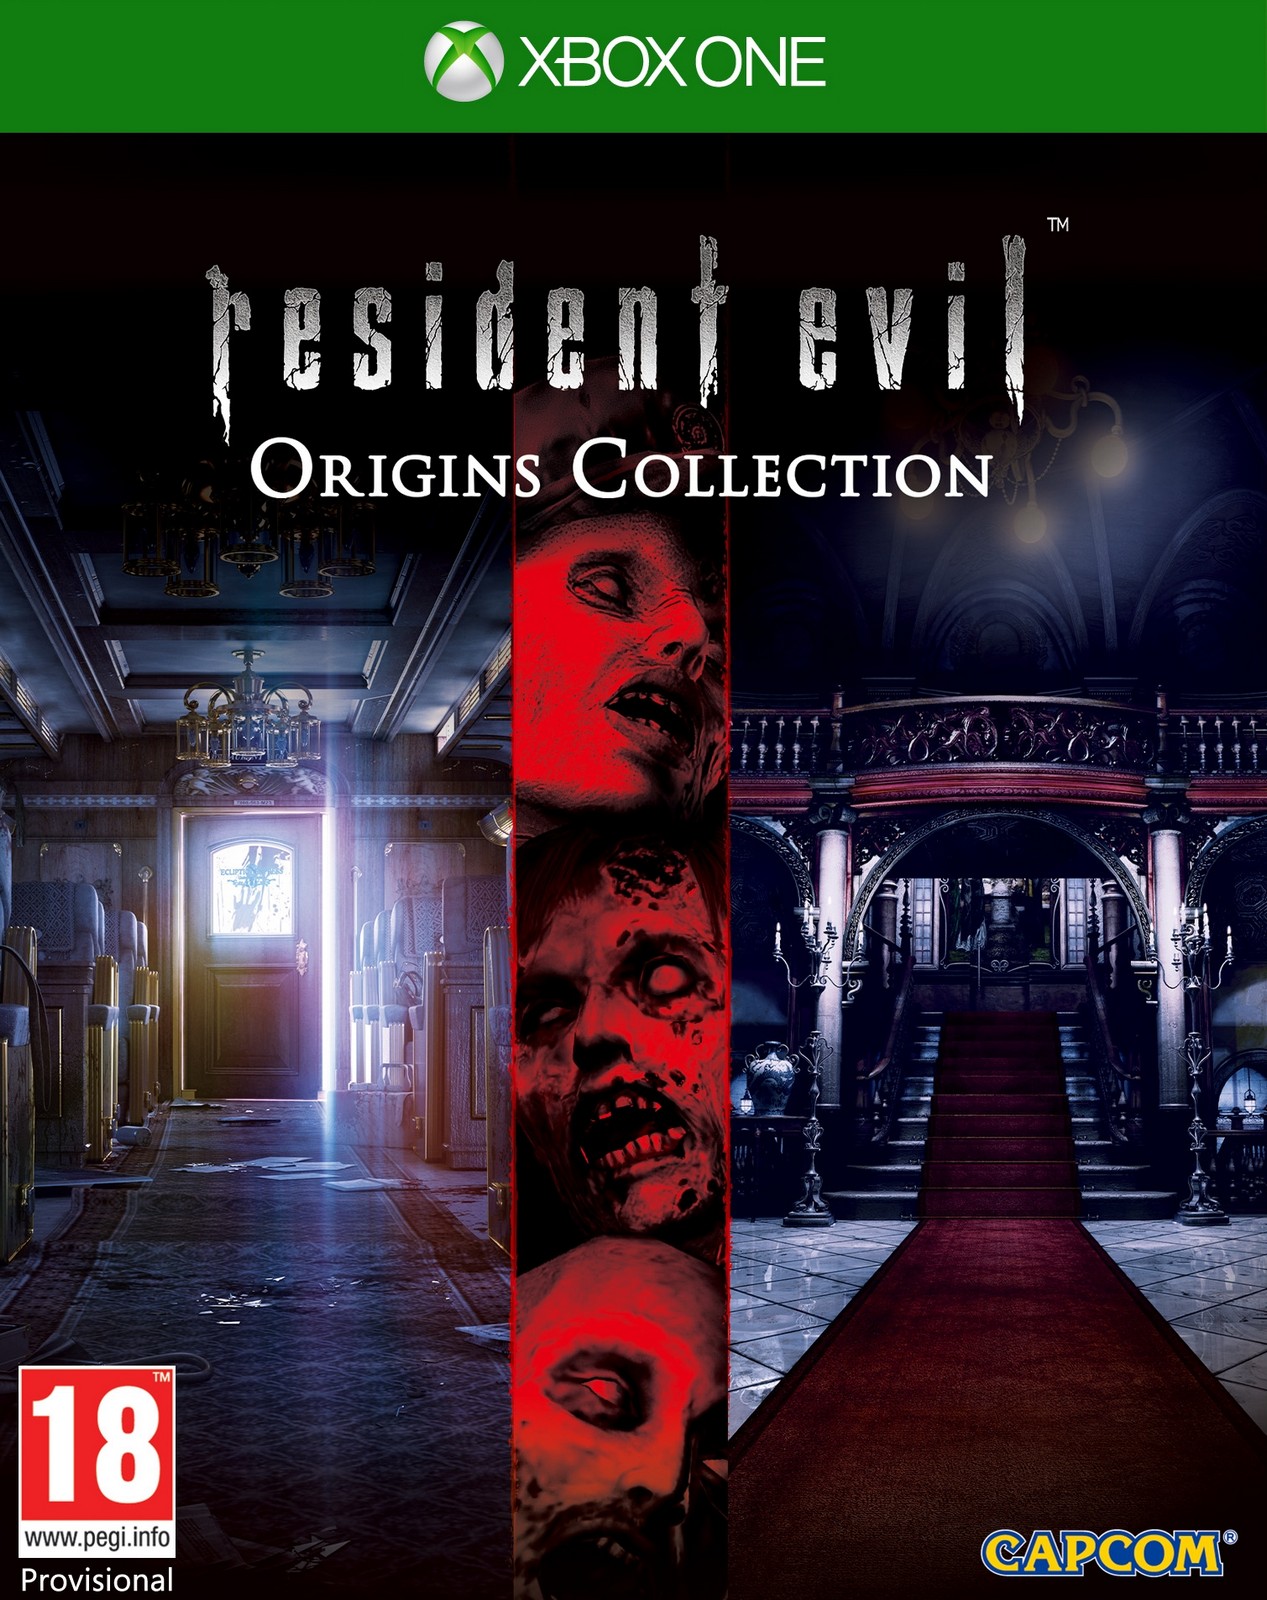 Xbox One Resident Evil Origins Collection